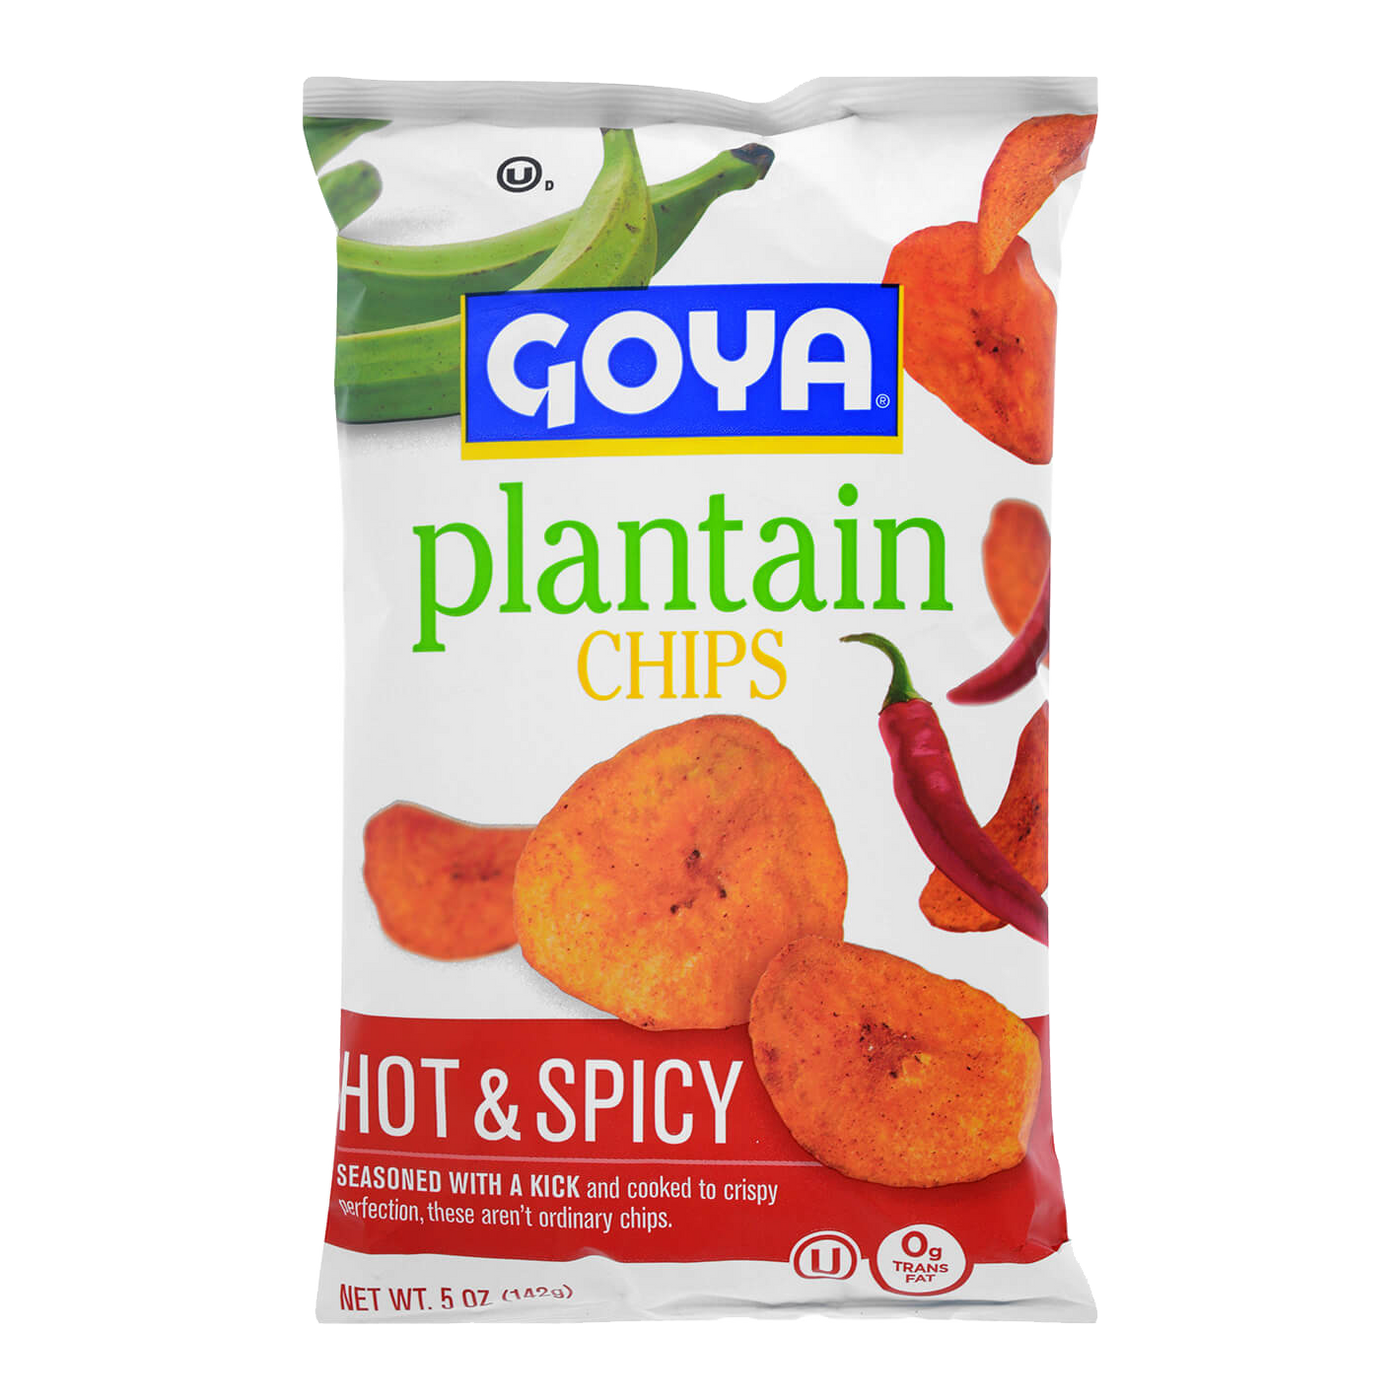   Goya Plantain Chips Hot & Spicy